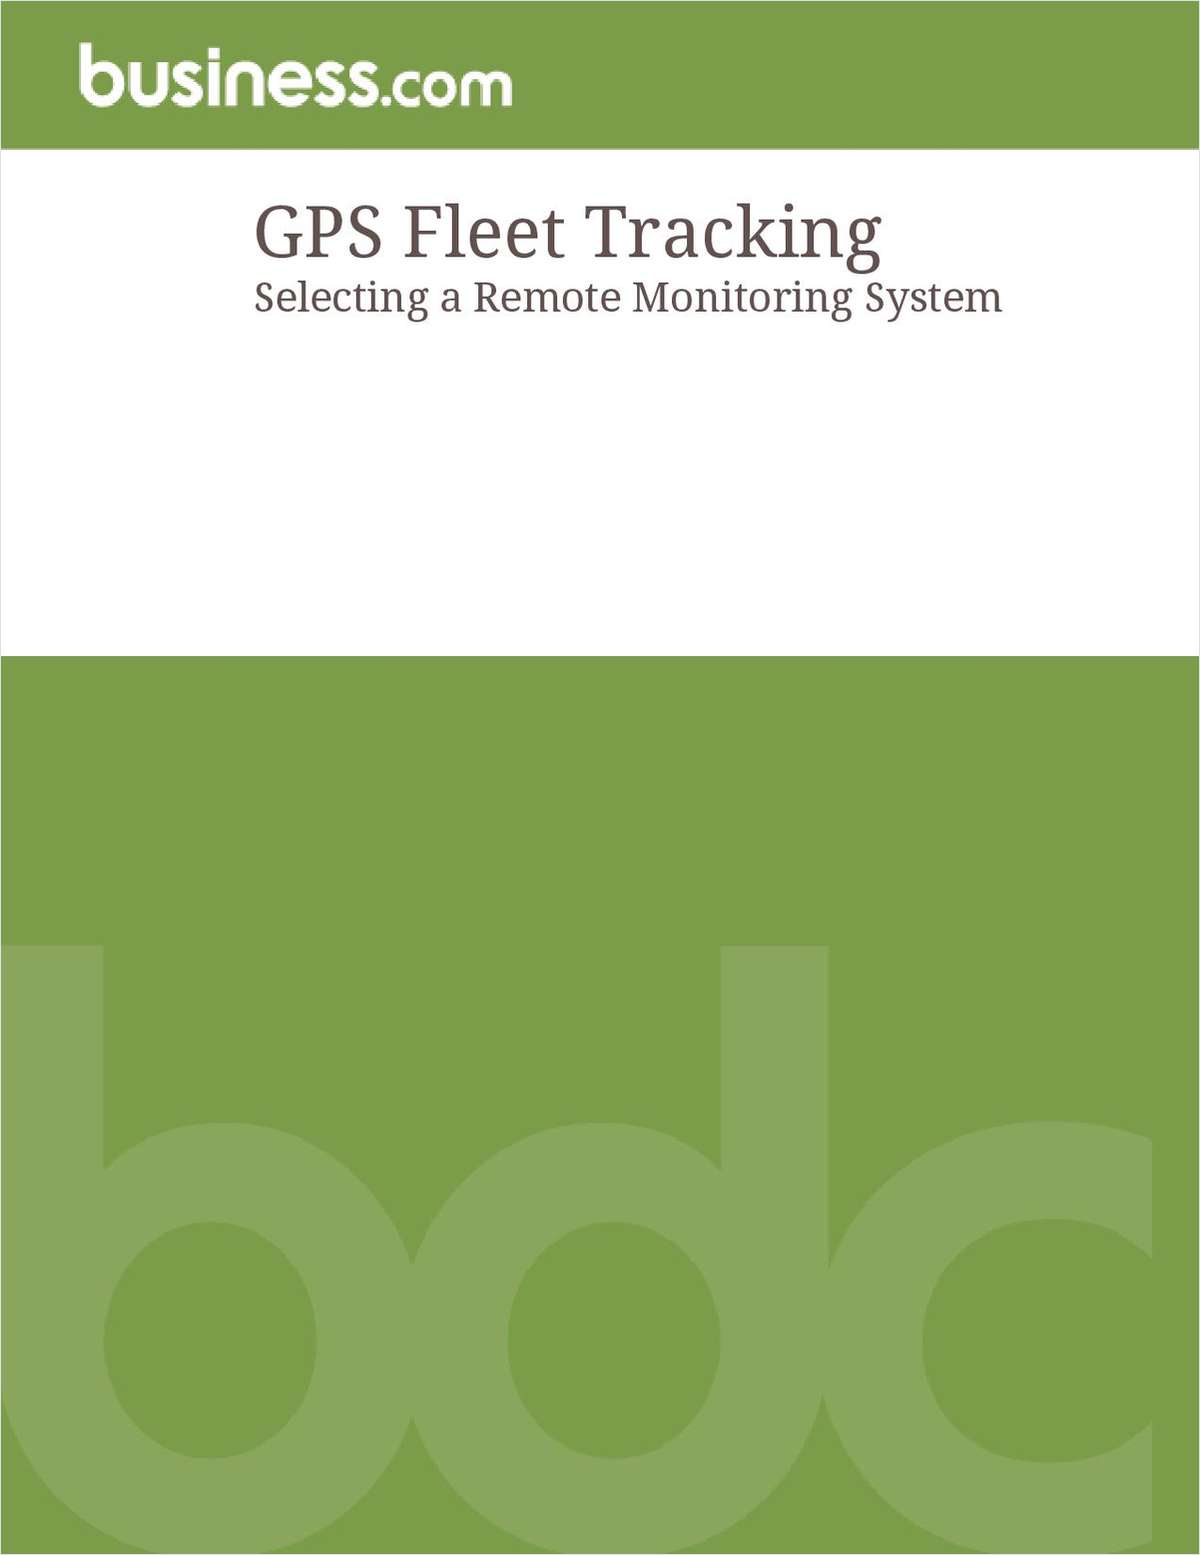 GPS Fleet Tracking:  Selecting a Remote Monitoring System